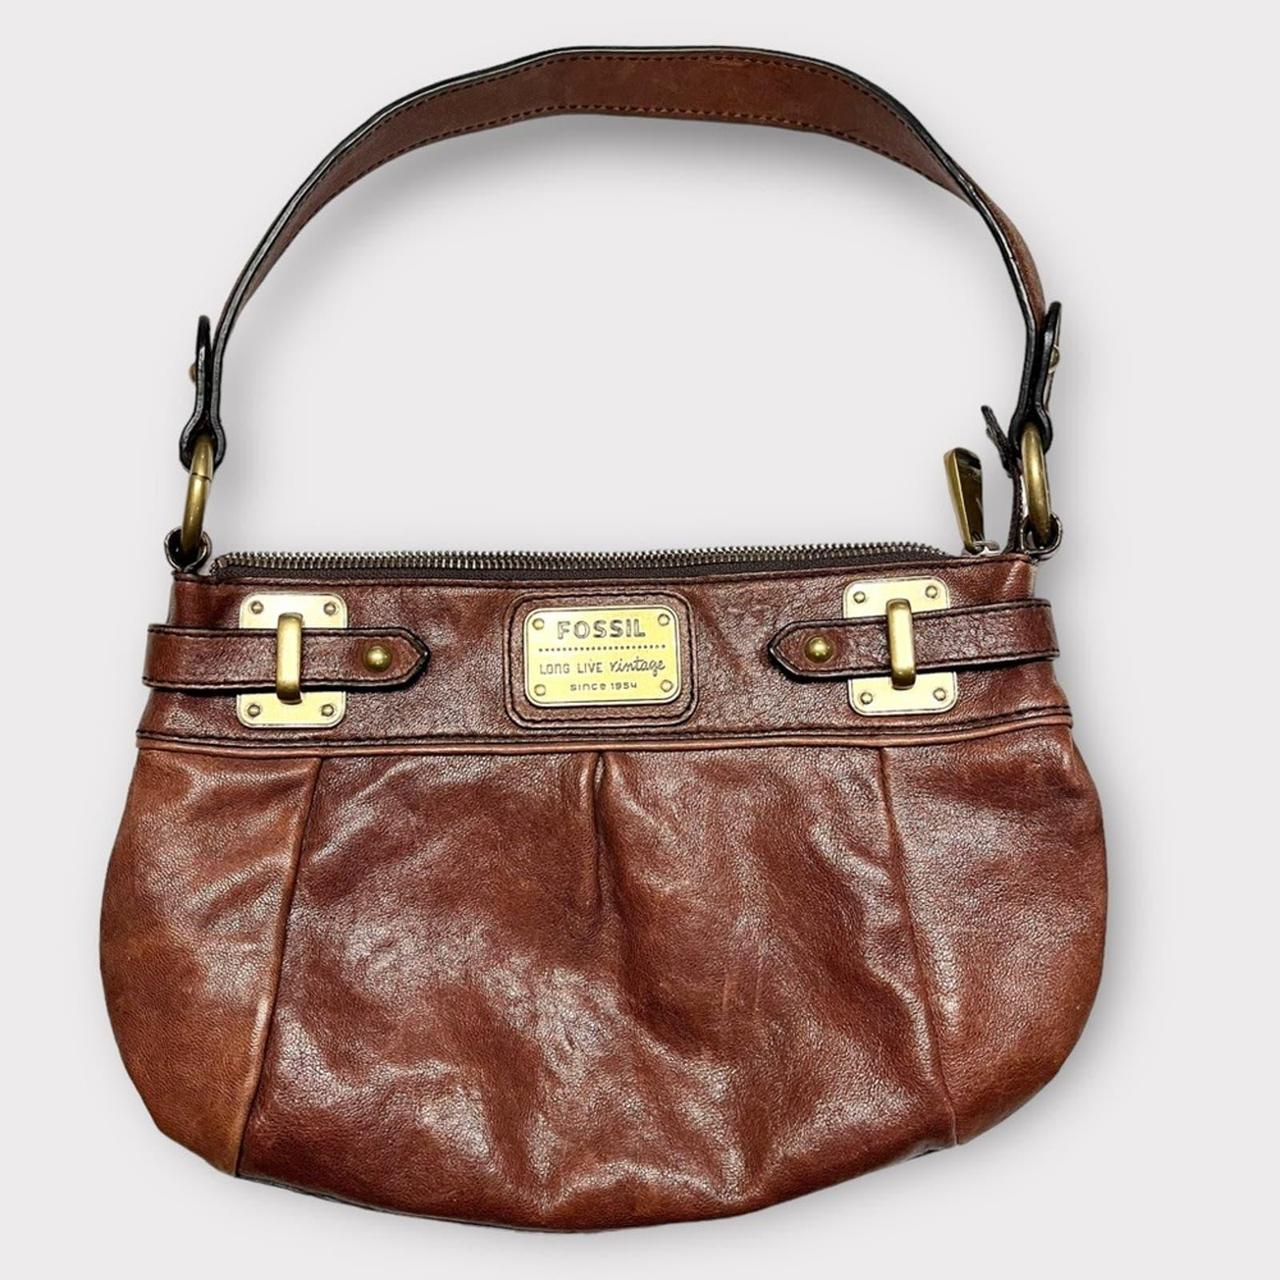 Fossil 75082 Caramel Pebbled Leather Purse Handbag LOVELY & CLEAN inside &  Out | eBay